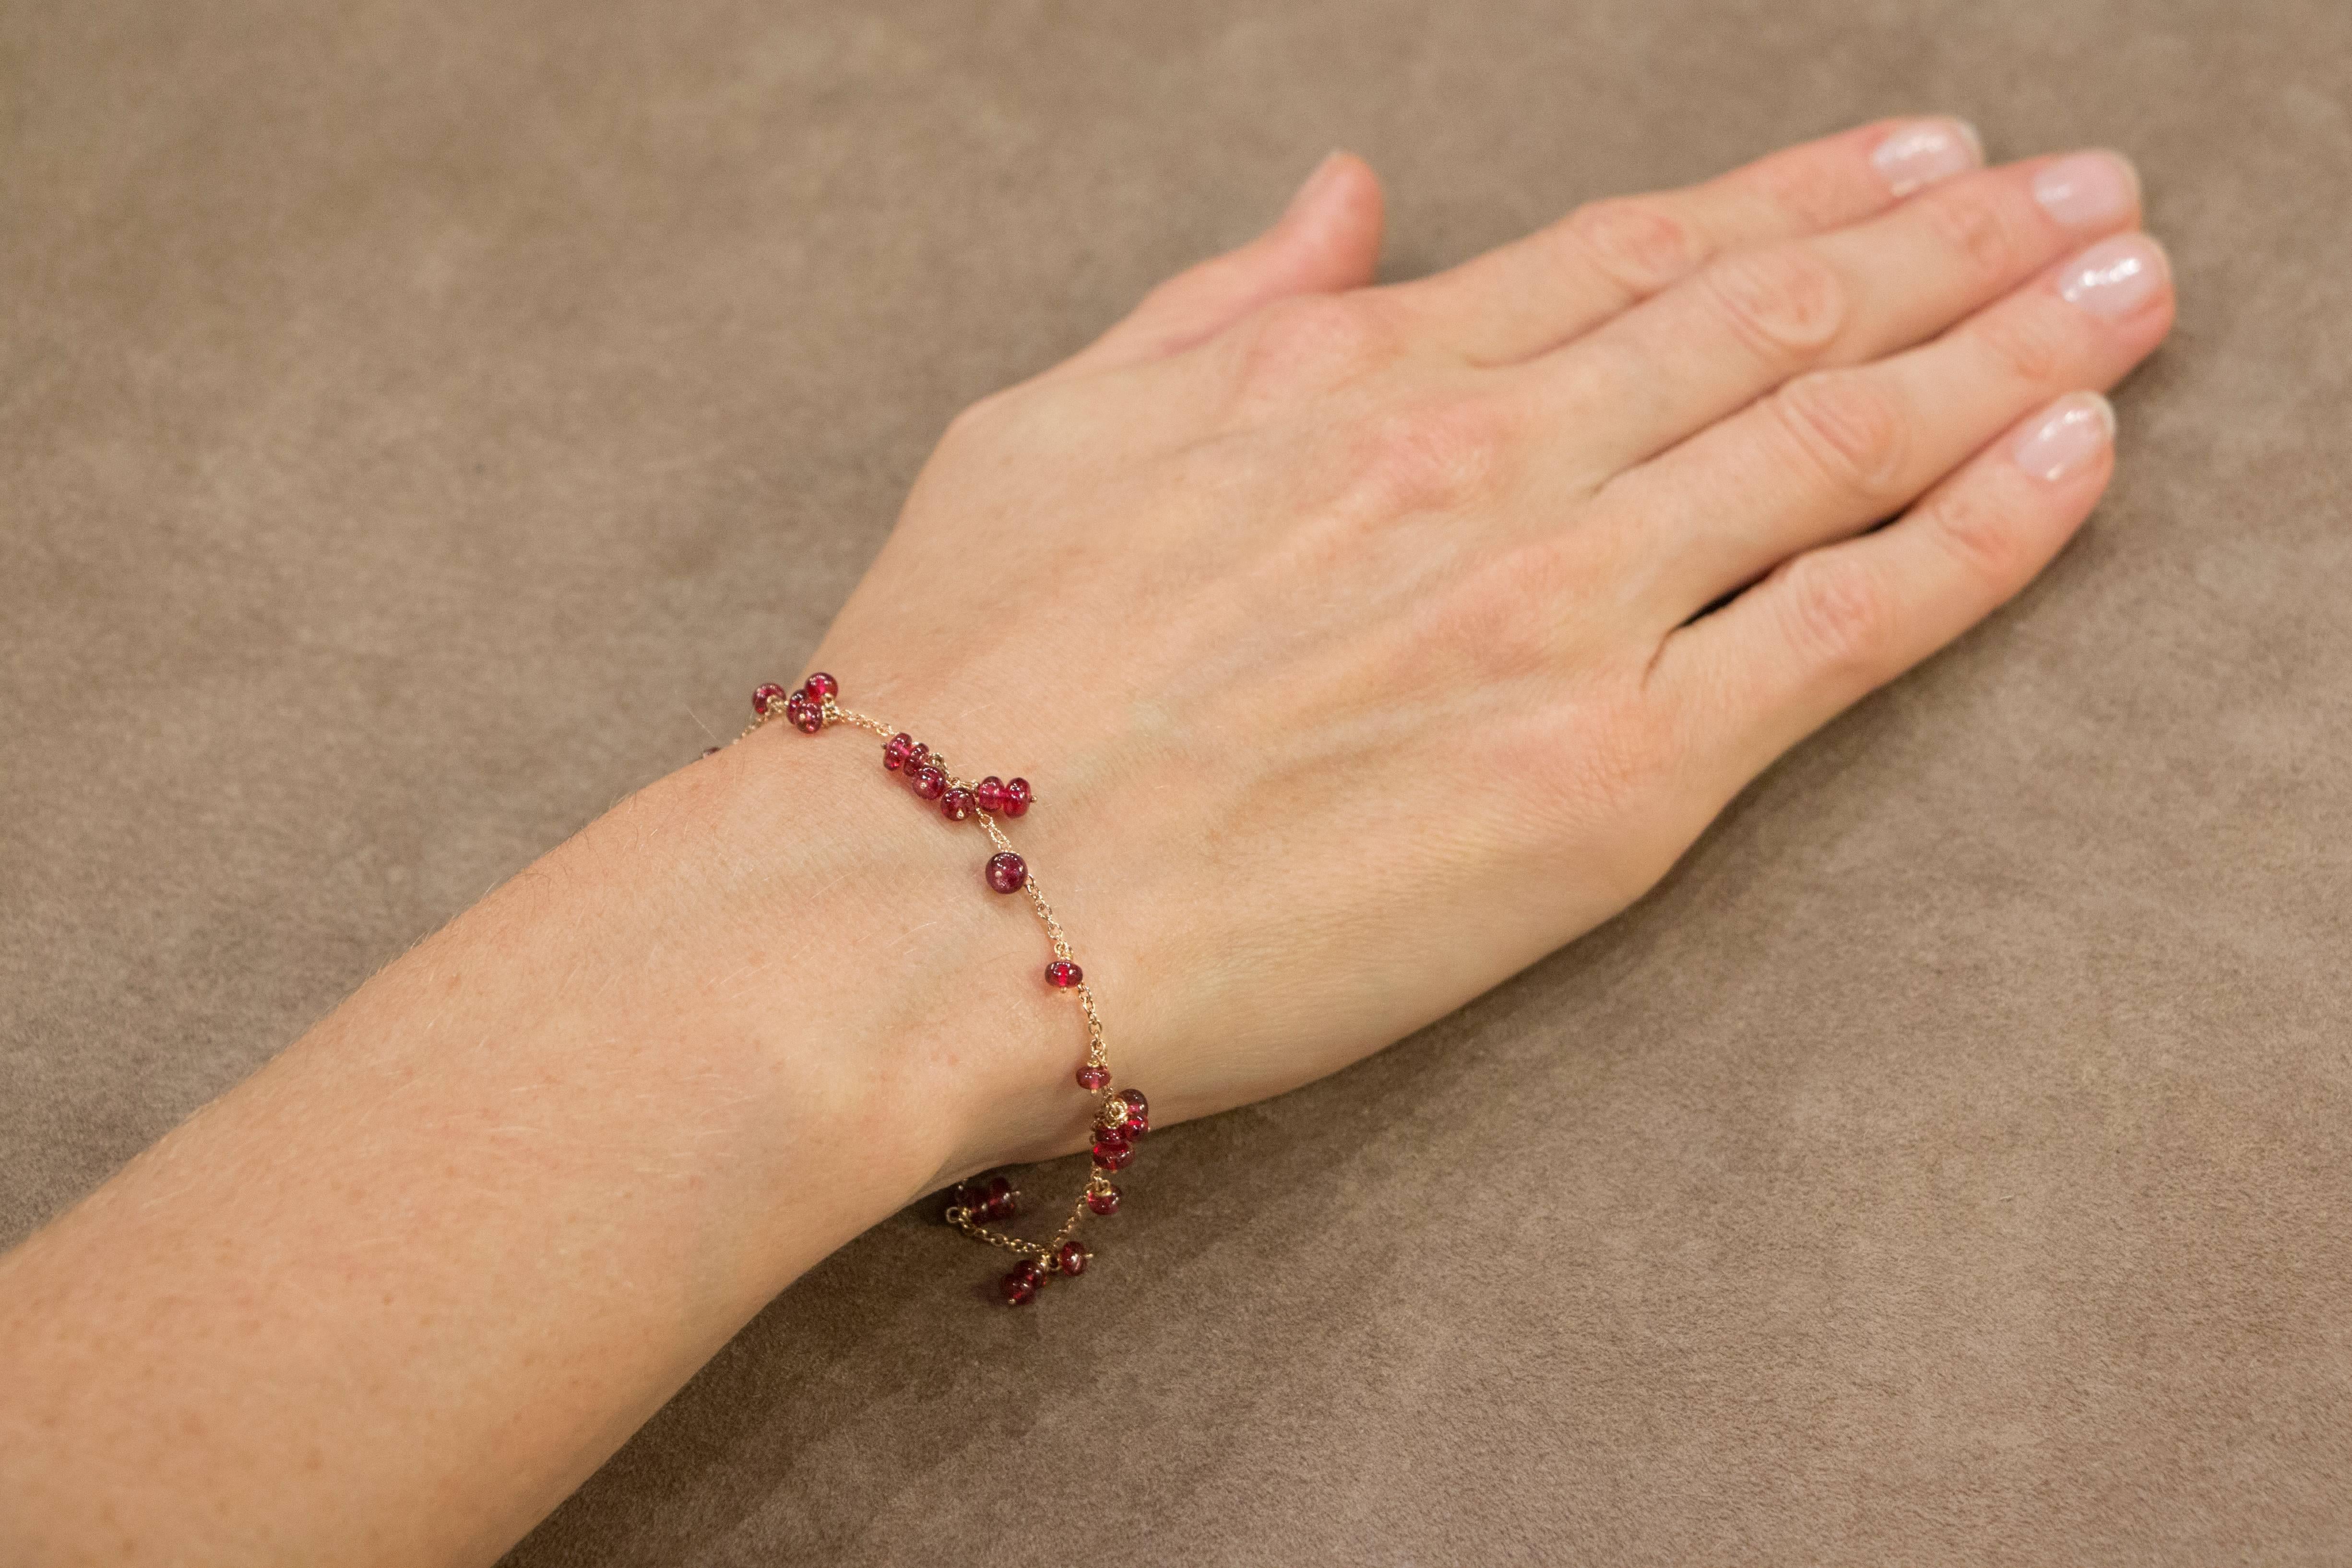 Jona design collection, hand crafted in Italy, 18 karat rose gold chain bracelet with Burmese red spinel bead pendants. Dimensions: 7.08 in. L x 0.51 in. W - 18 cm. L x 1.2 cm. W
All Jona jewelry is new and has never been previously owned or worn.